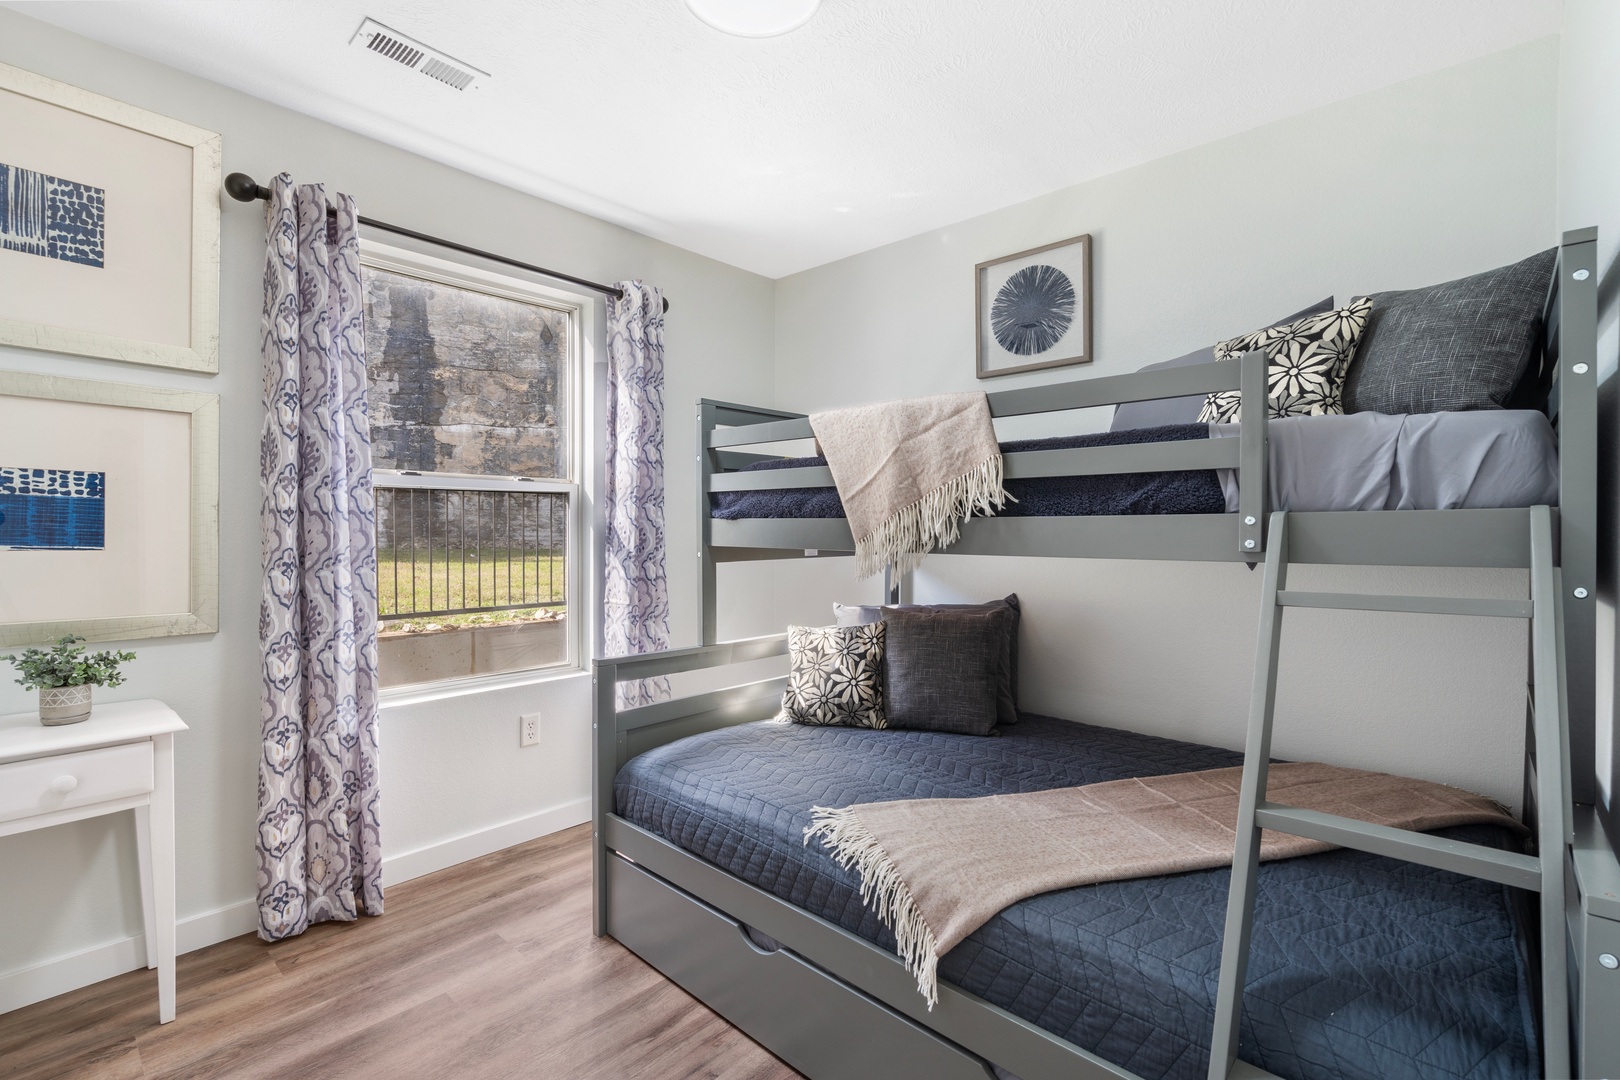 The second bedroom features a cozy twin-over-full bunkbed